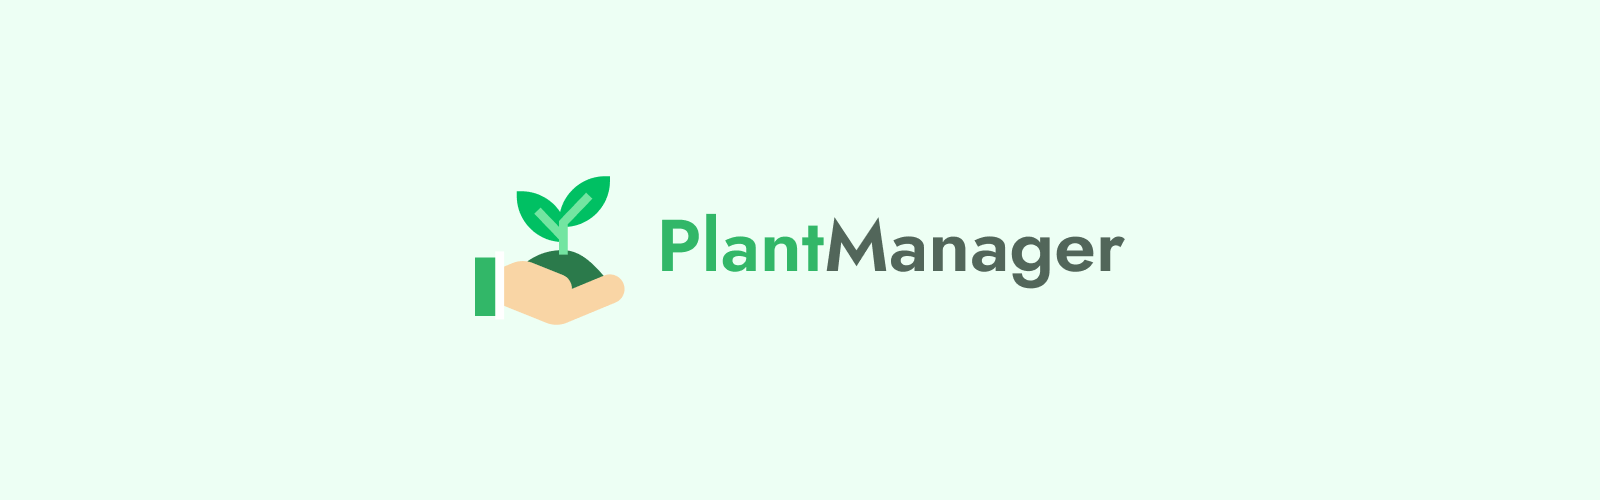 PlantManager